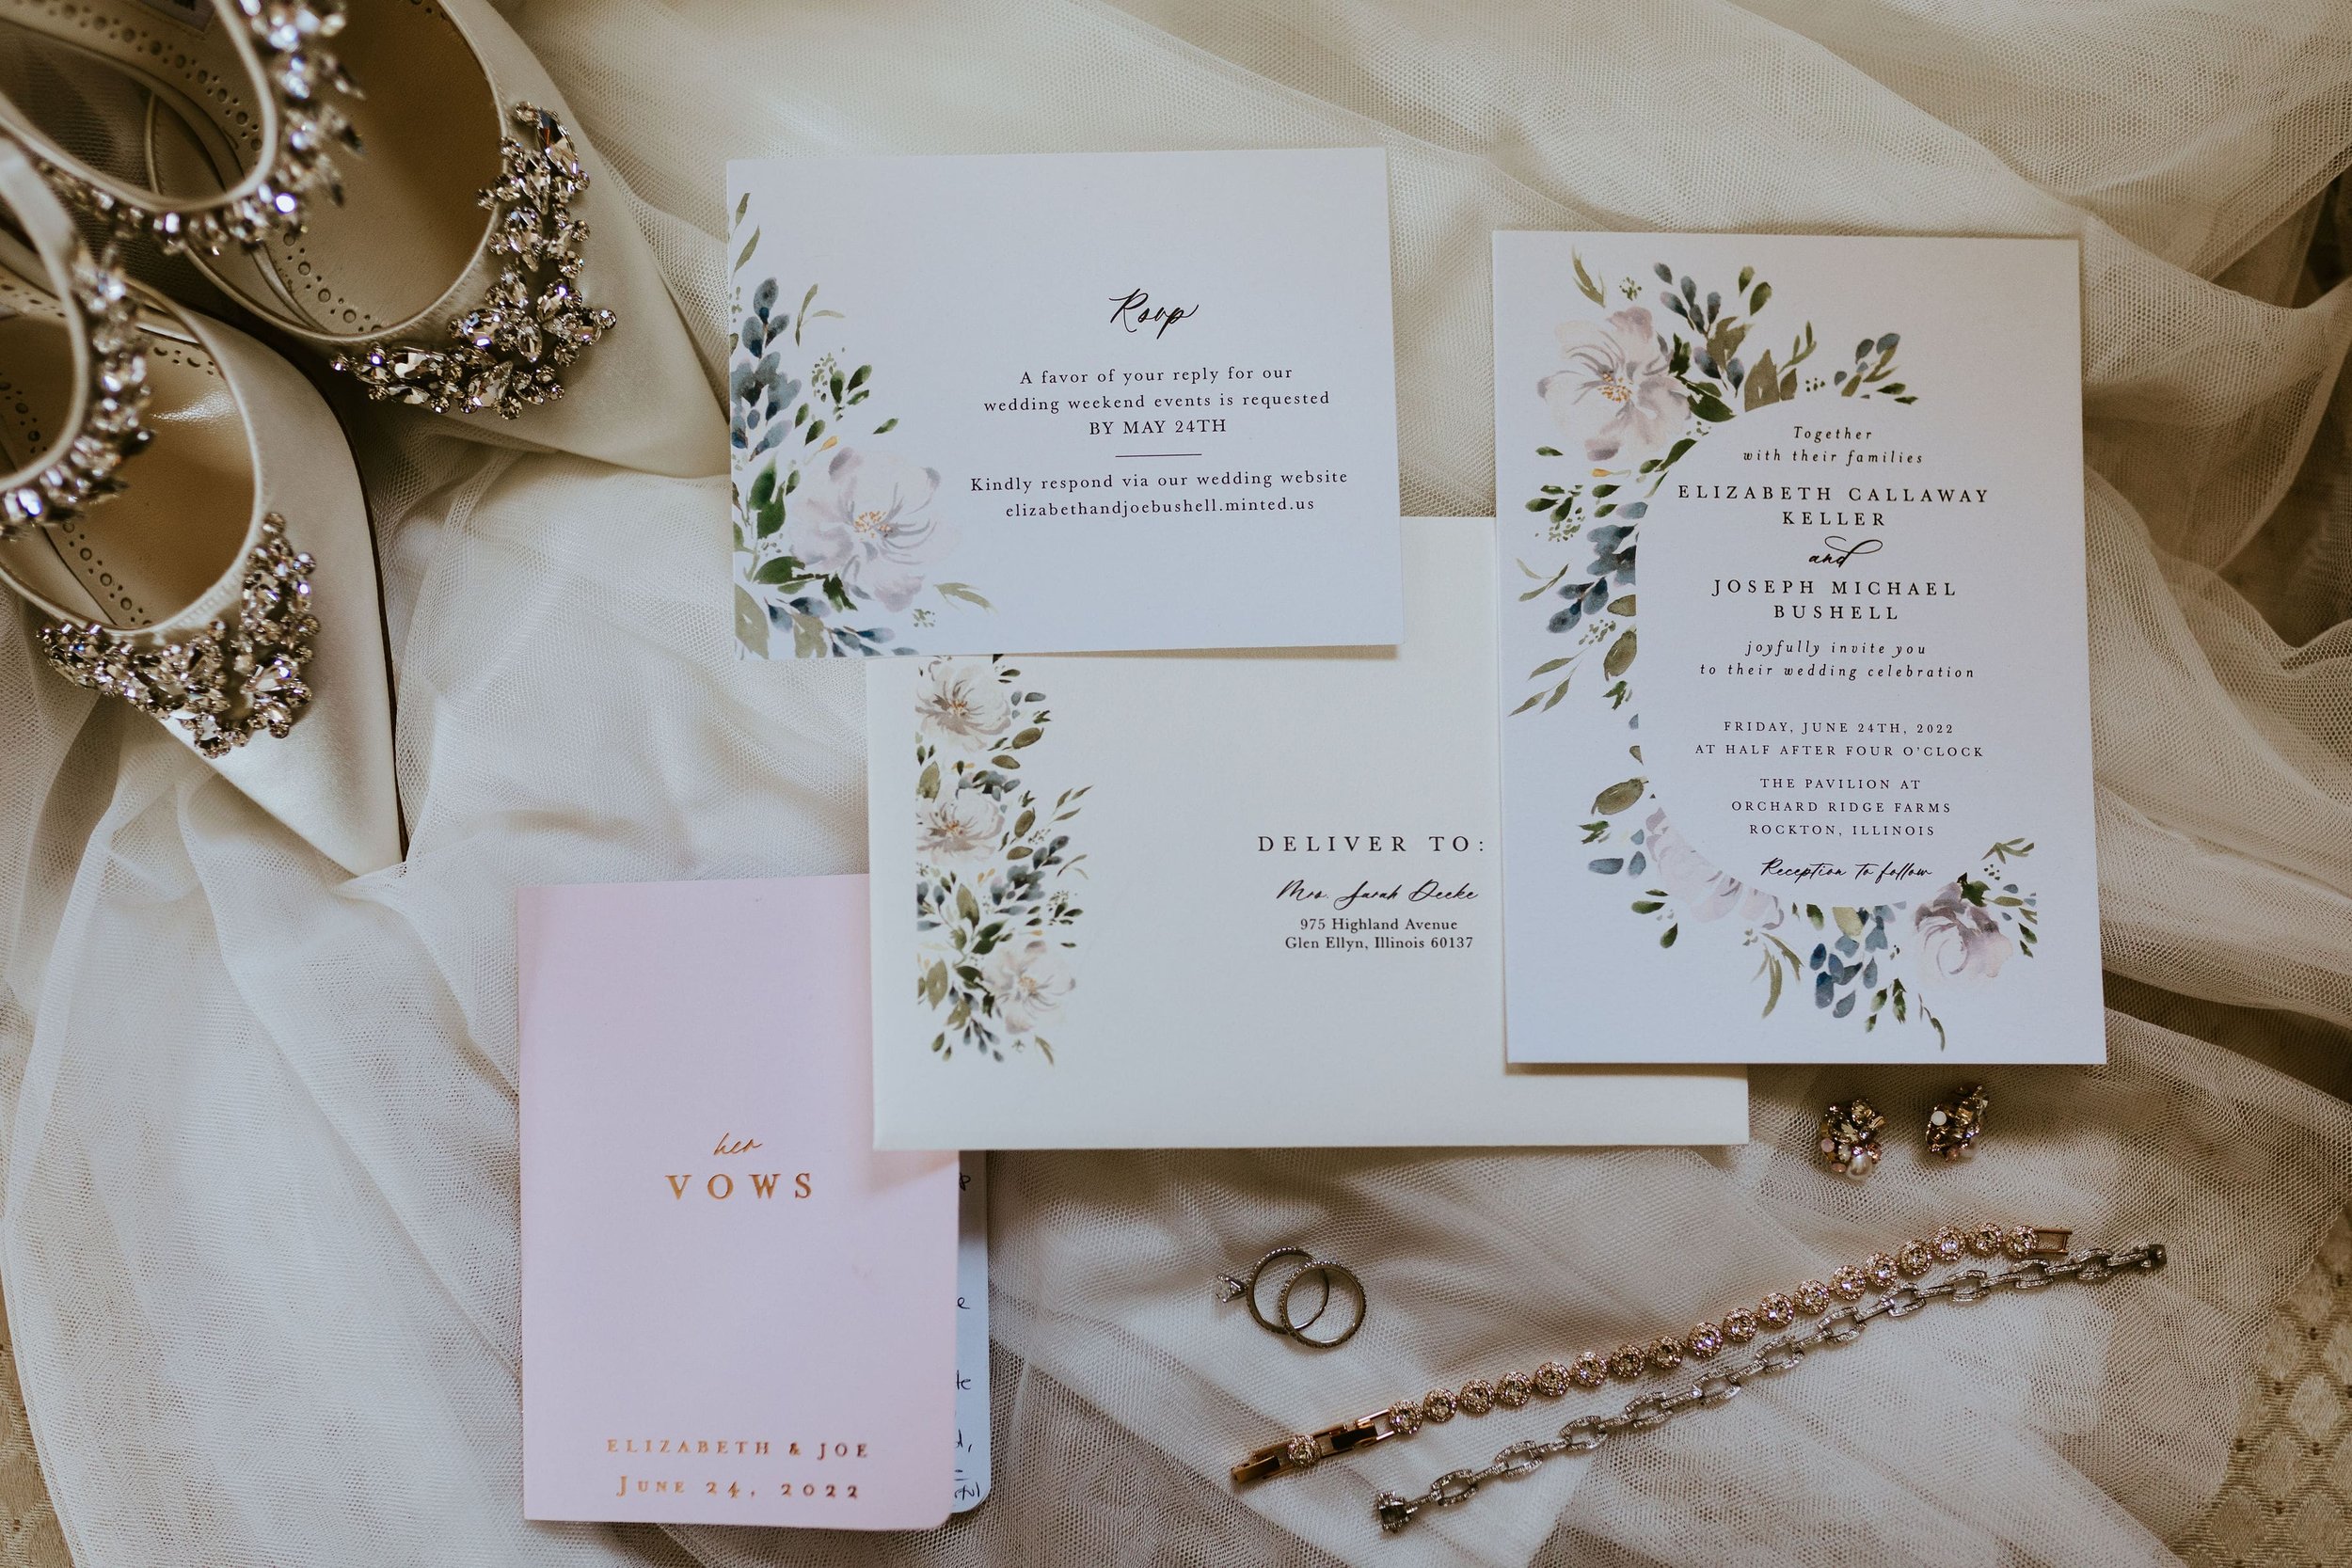 Pink and white classic wedding invitation suite and wedding details